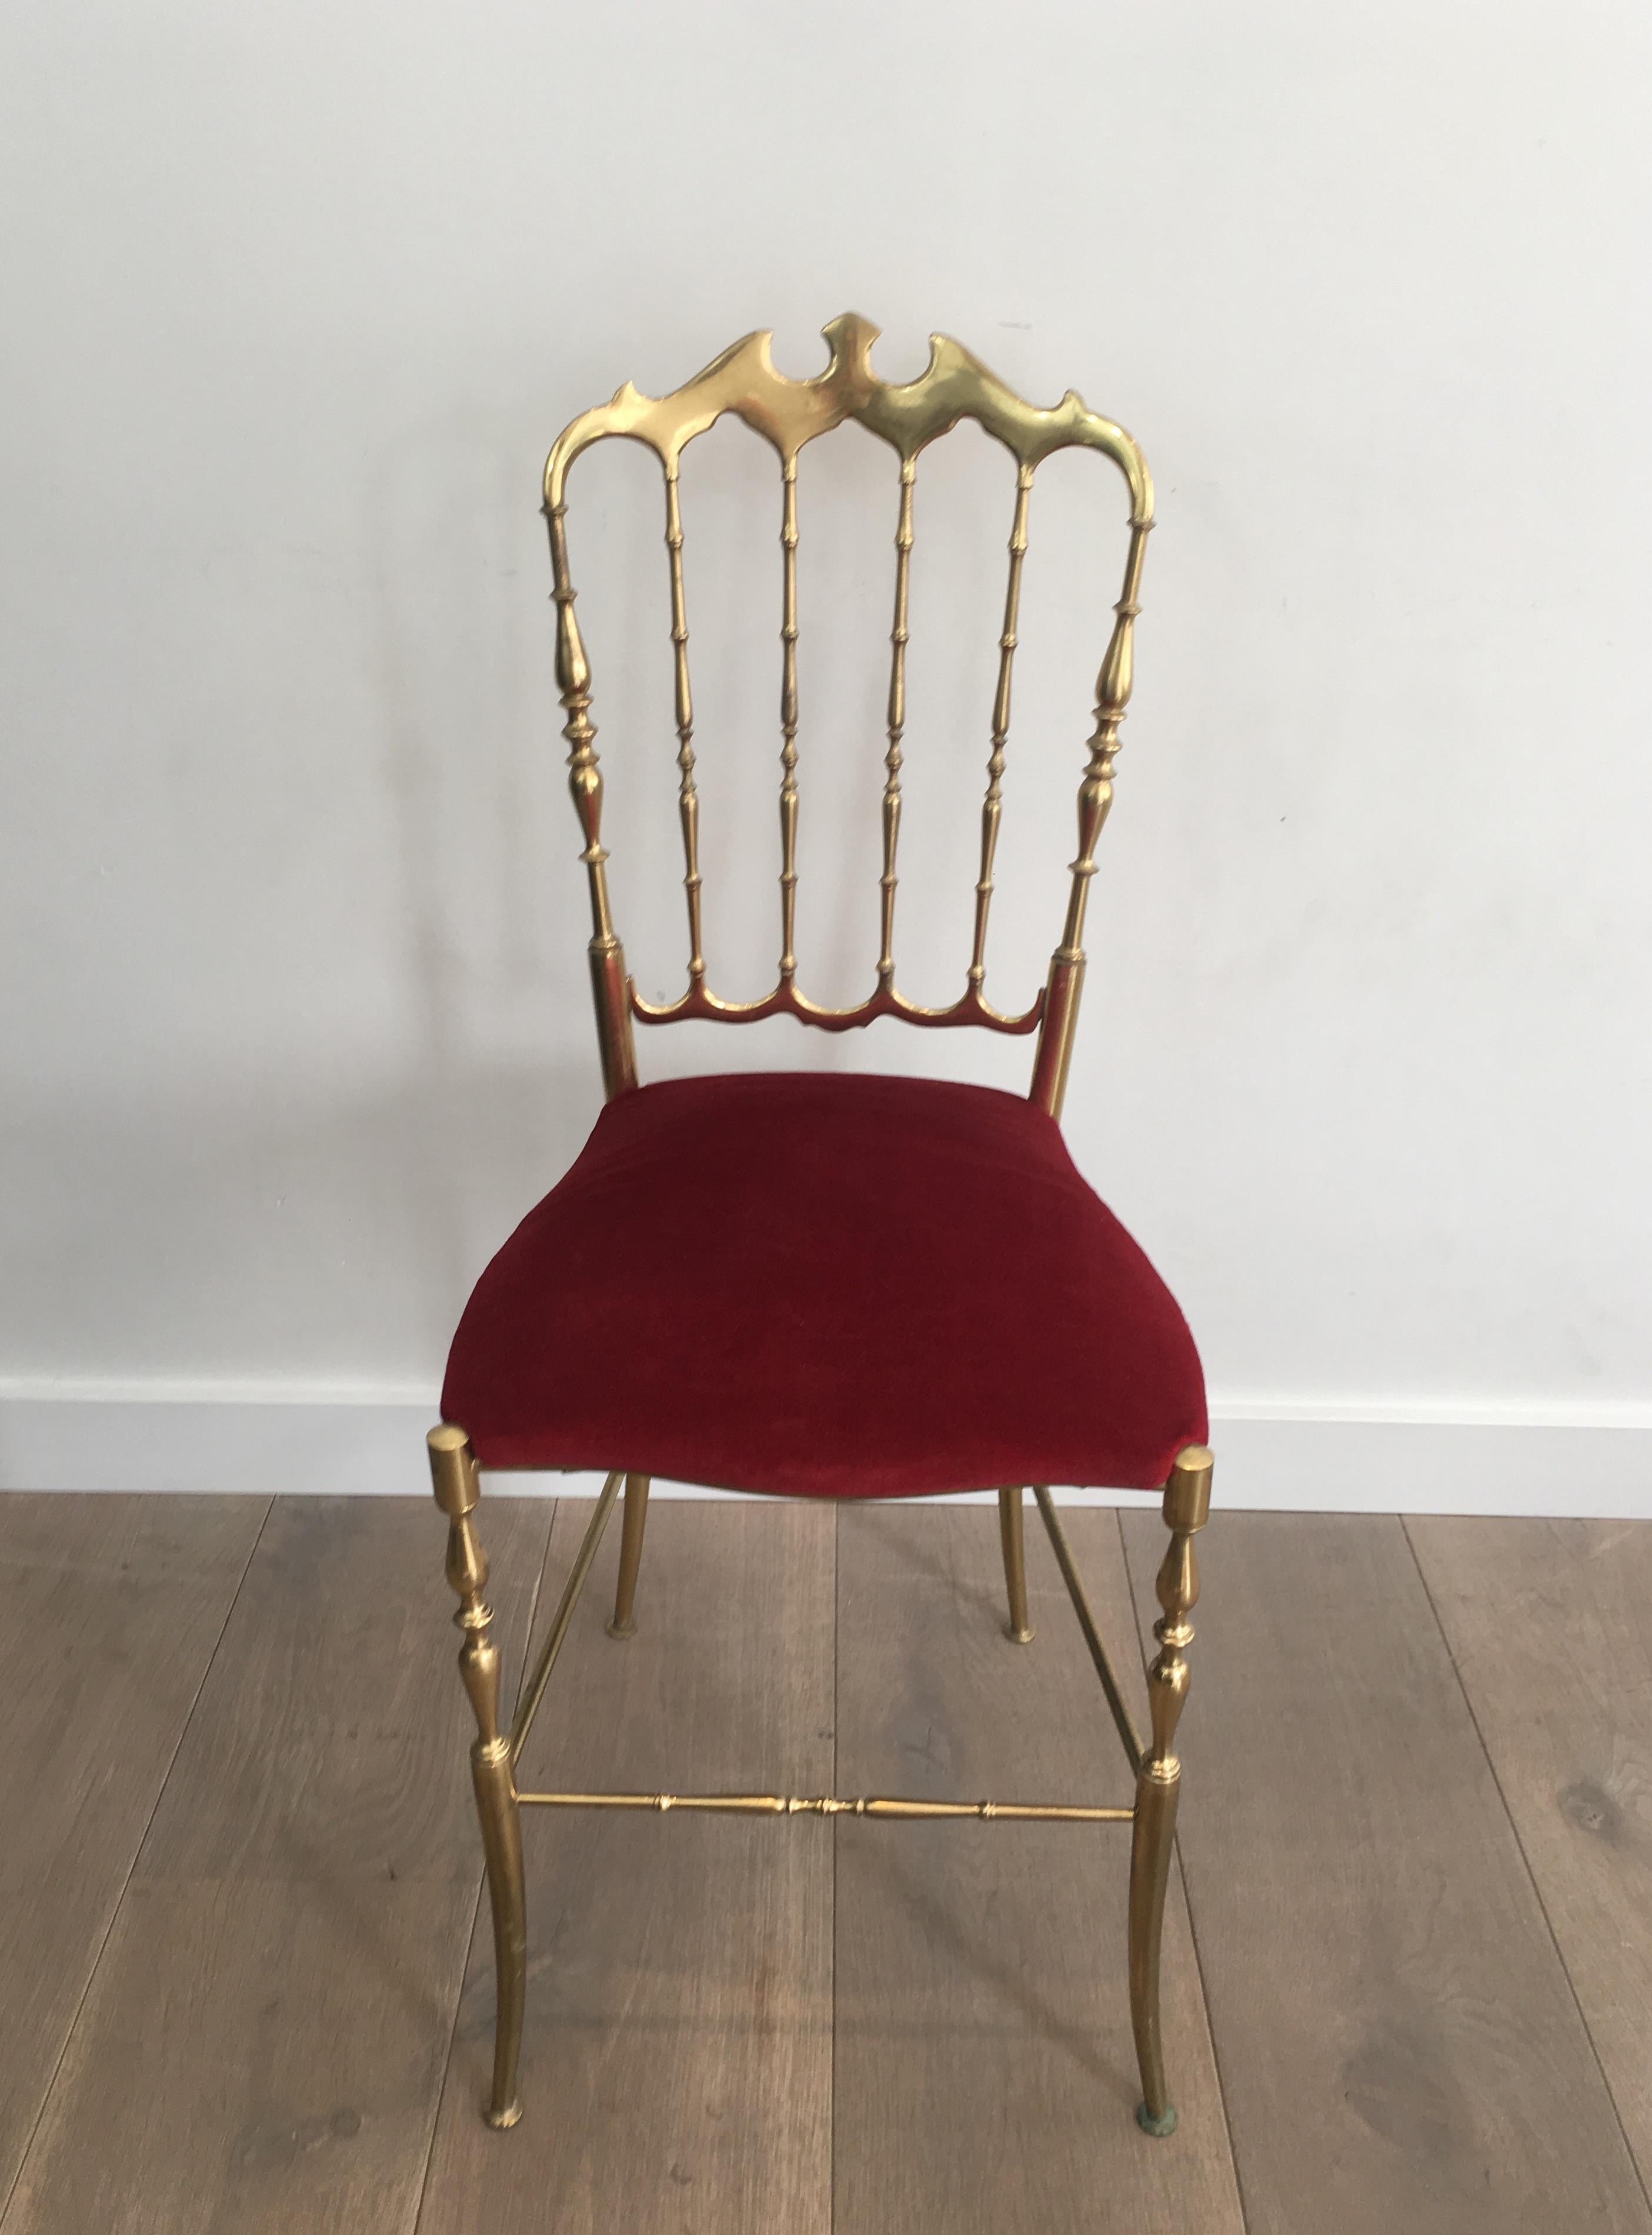 This Chiavari chair is all made of brass with a red velvet on the seat. The quality of this chair is a very nice. This is a French work, circa 1940.